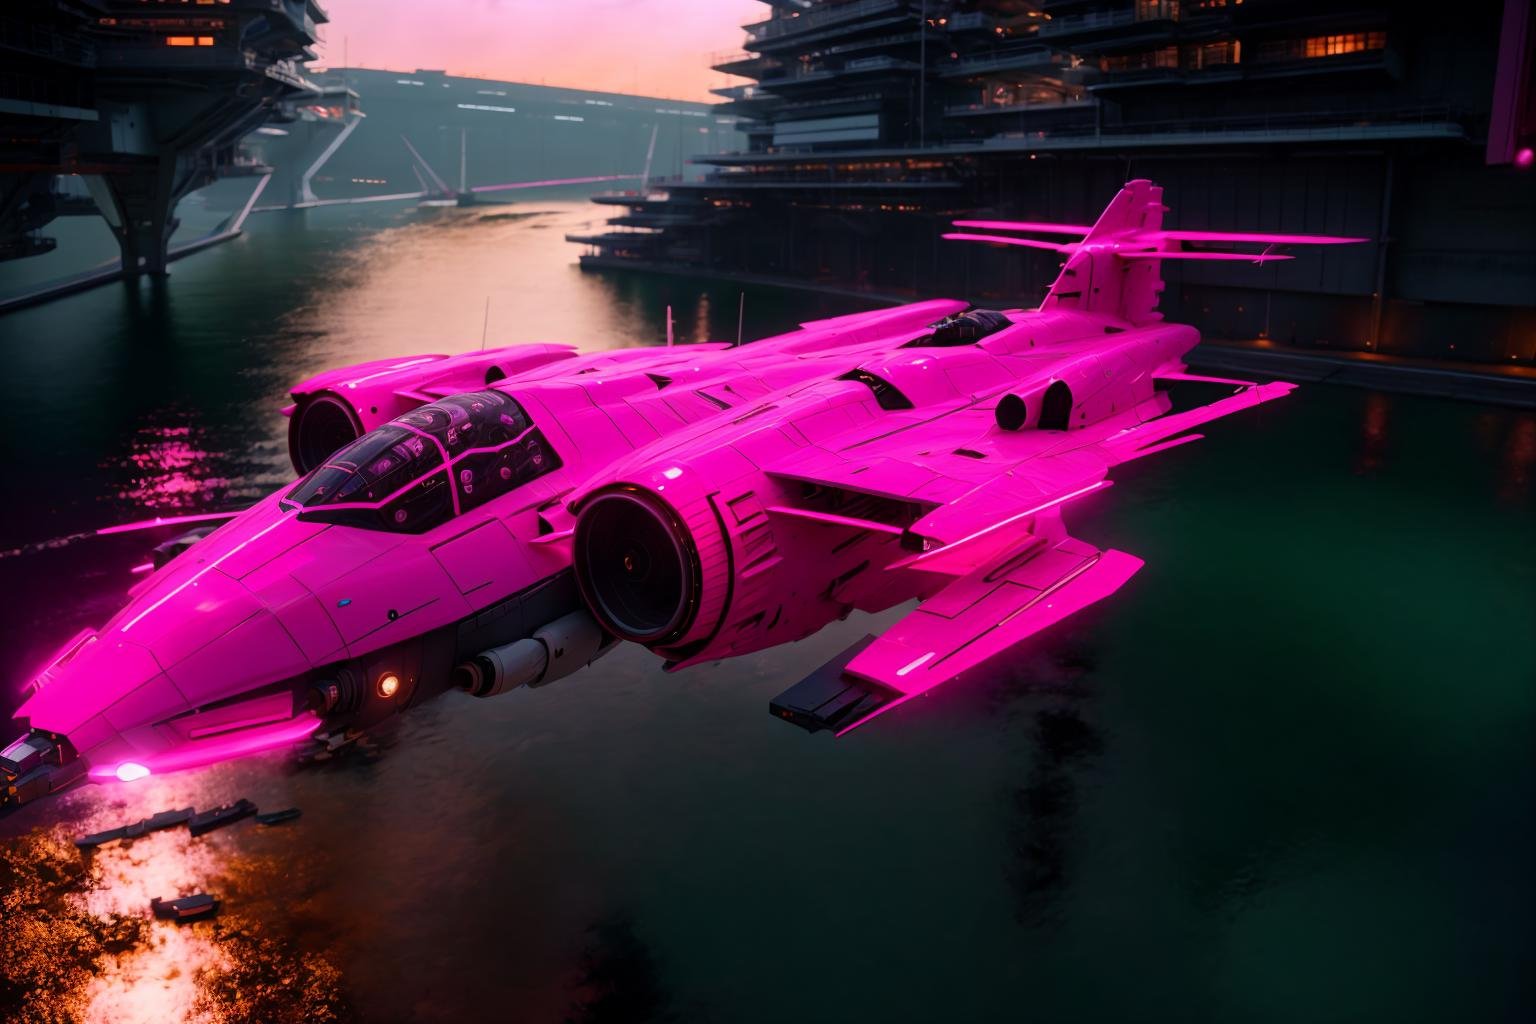 <lora:zxrspc_v3:1> Cherry Blossom Pink zxrspc, masterpiece, best cinematic quality, photorealistic highly detailed 8k raw photo, volumetric lighting, volumetric shadows, reflective fuselage, A floating city in the clouds, where people live amidst the mist and walkways suspended in the air